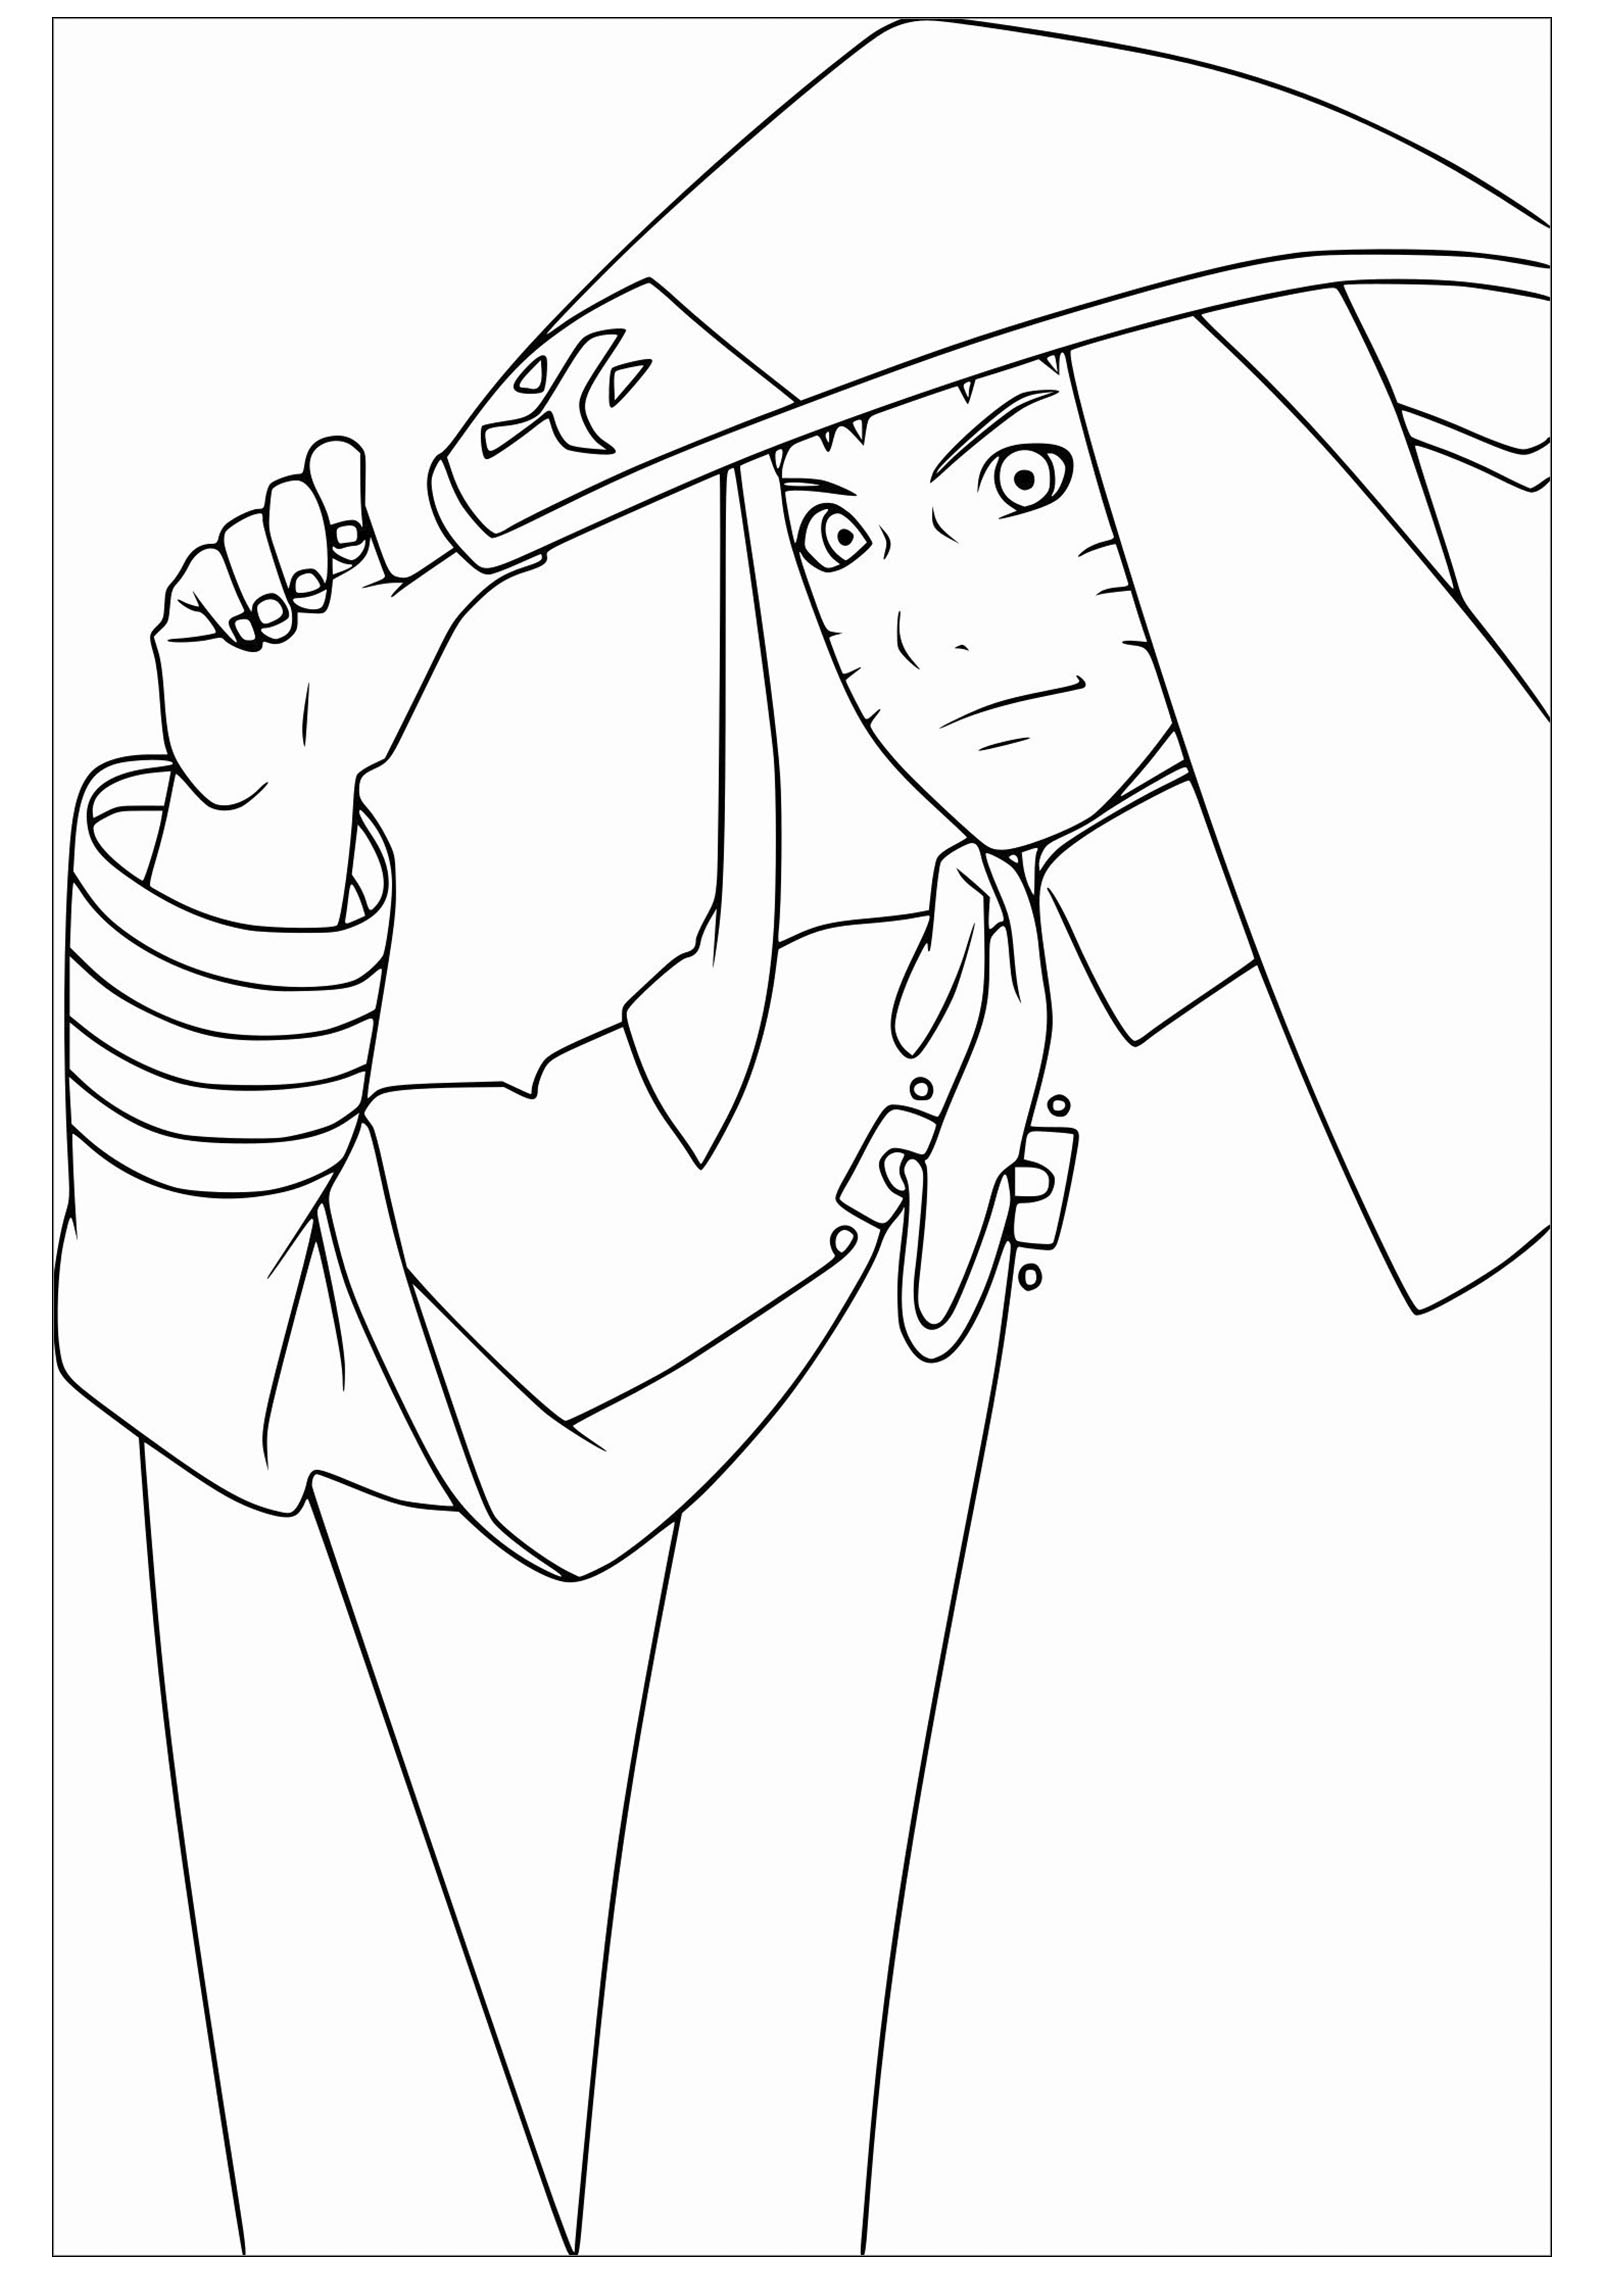 Naruto coloring page from Just Color